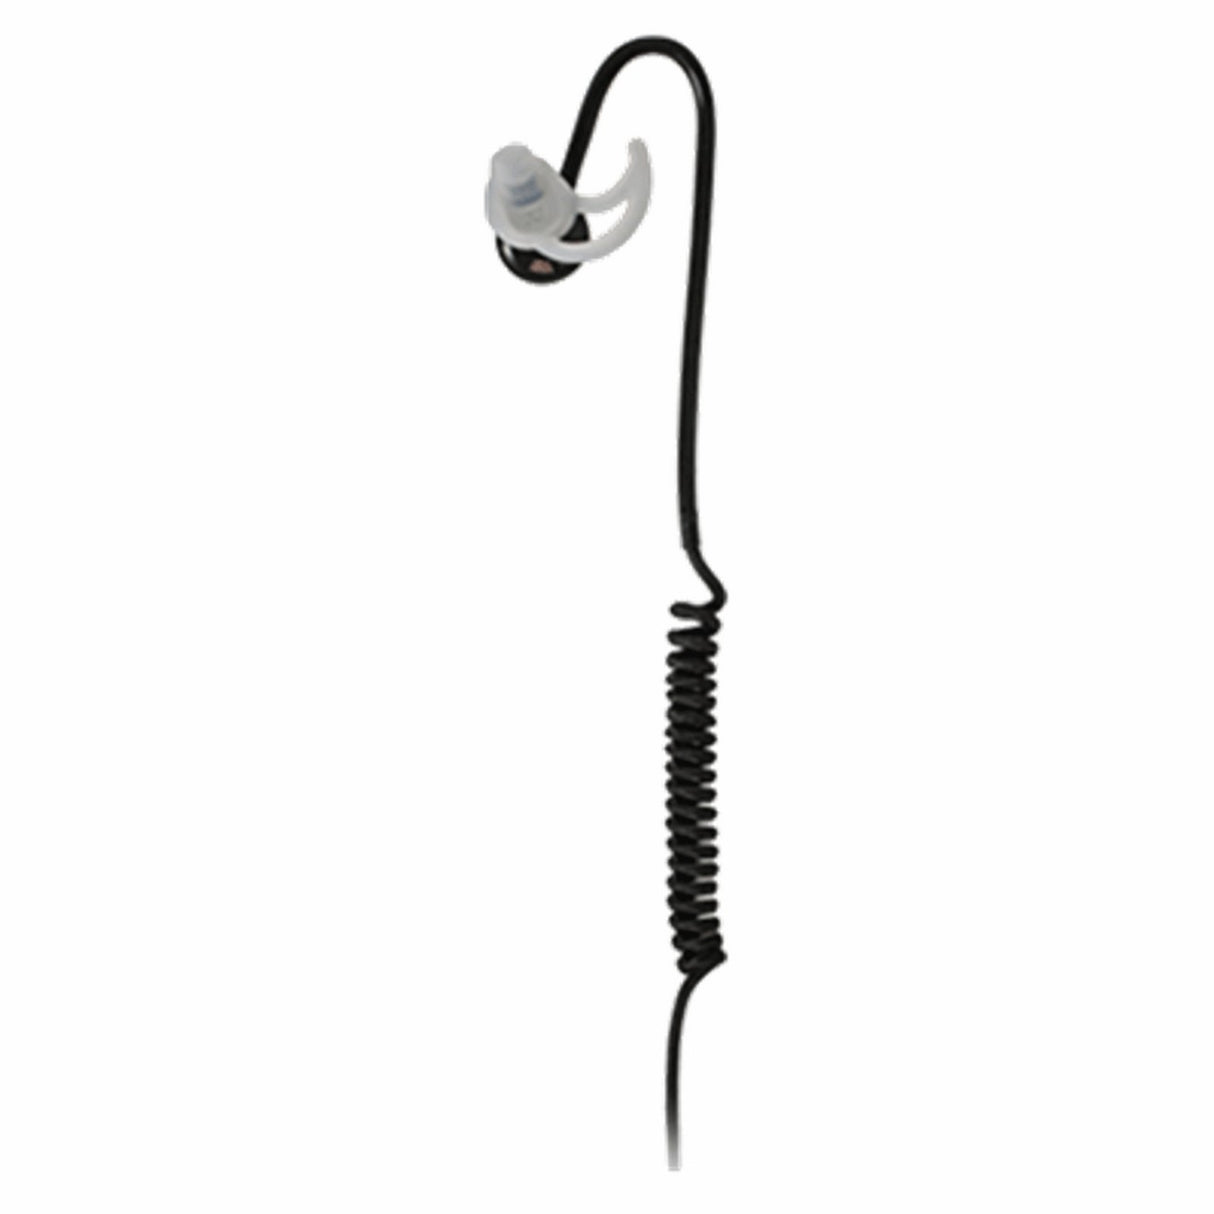 Klein Electronics Intrepid M8-BR Braided Cable Single Wire Earpiece for Moto TRBO SL Series Radios